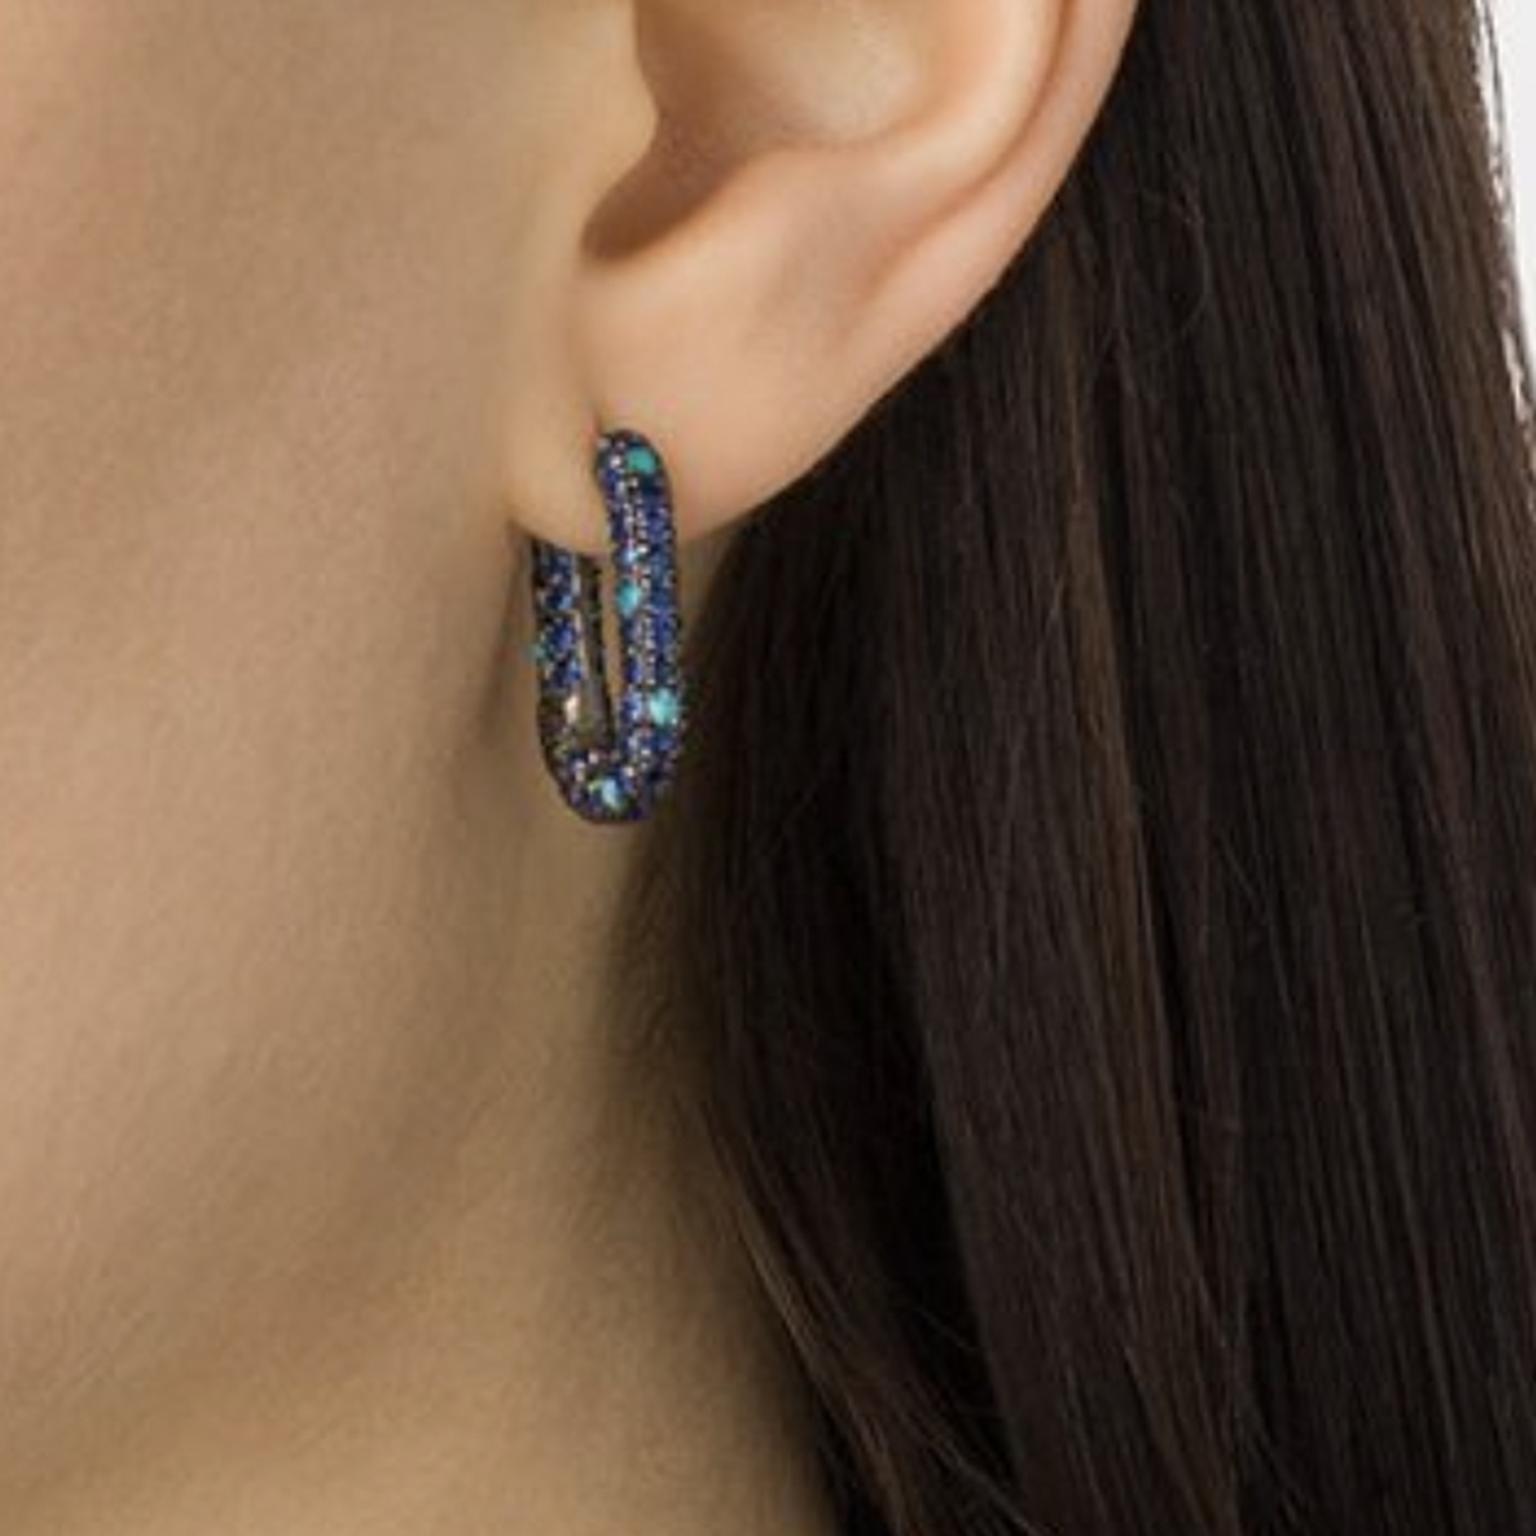 Turquoise and sapphire earrings by Selim Mouzannar on model